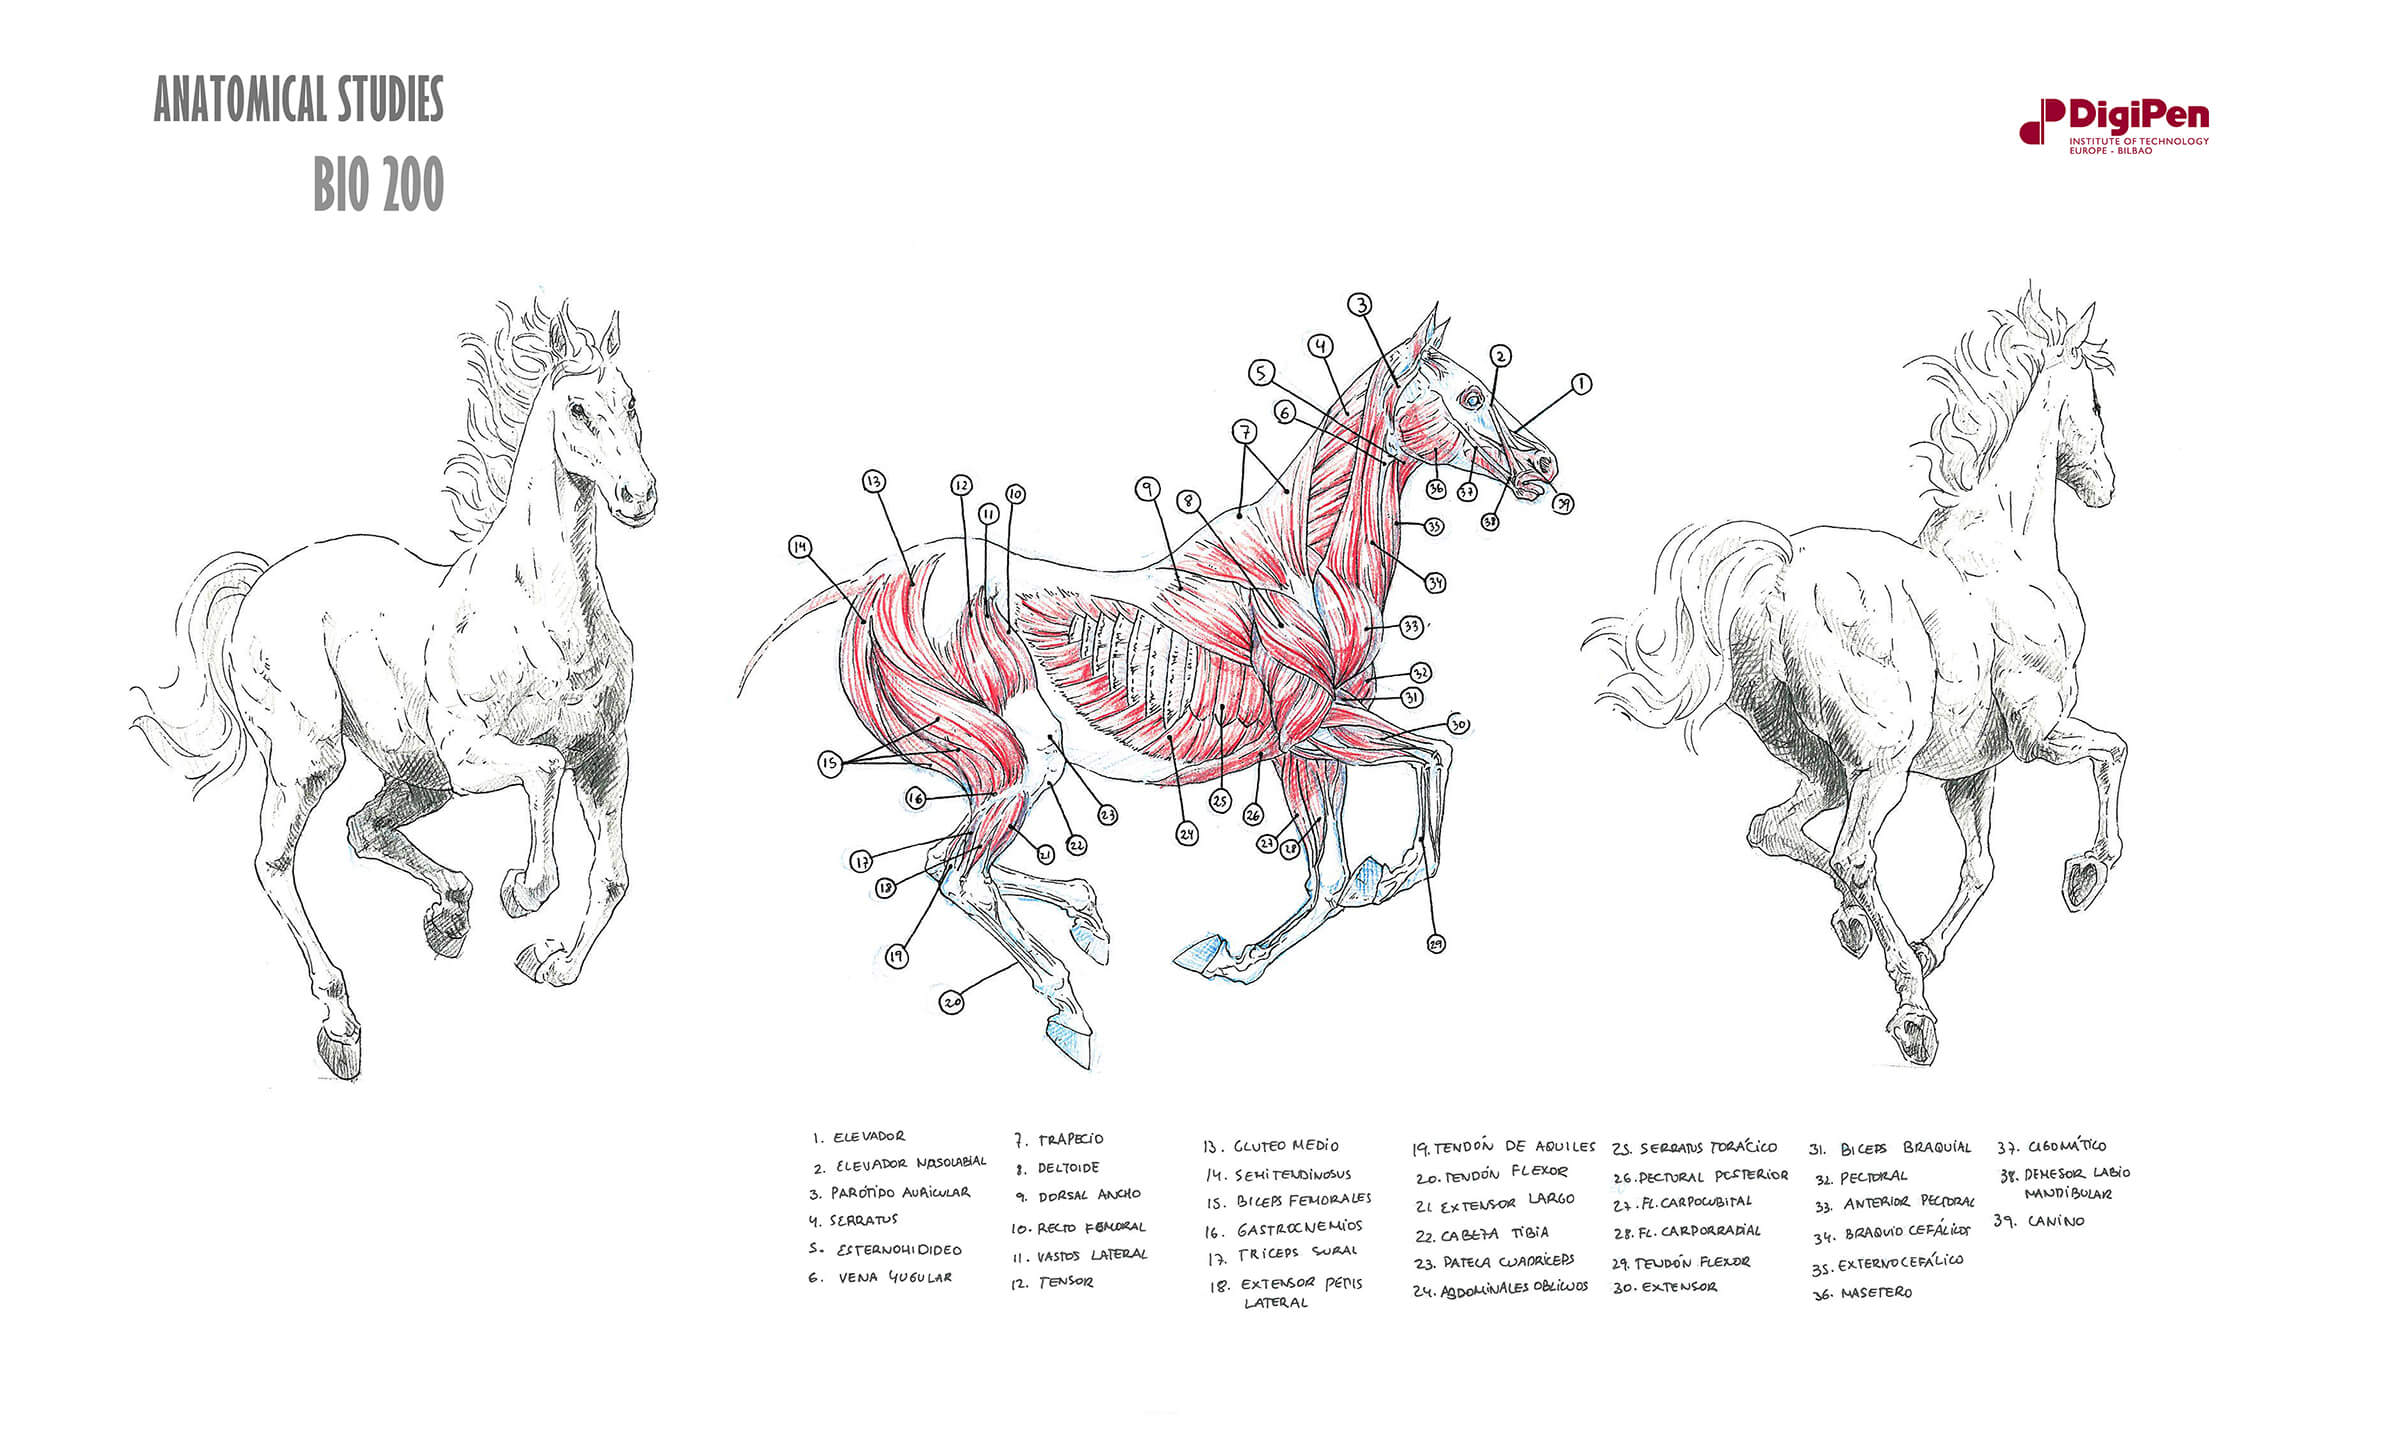 Black-white-and-red anatomical sketches of horse in mid-gallop and cross-section of its muscular system.